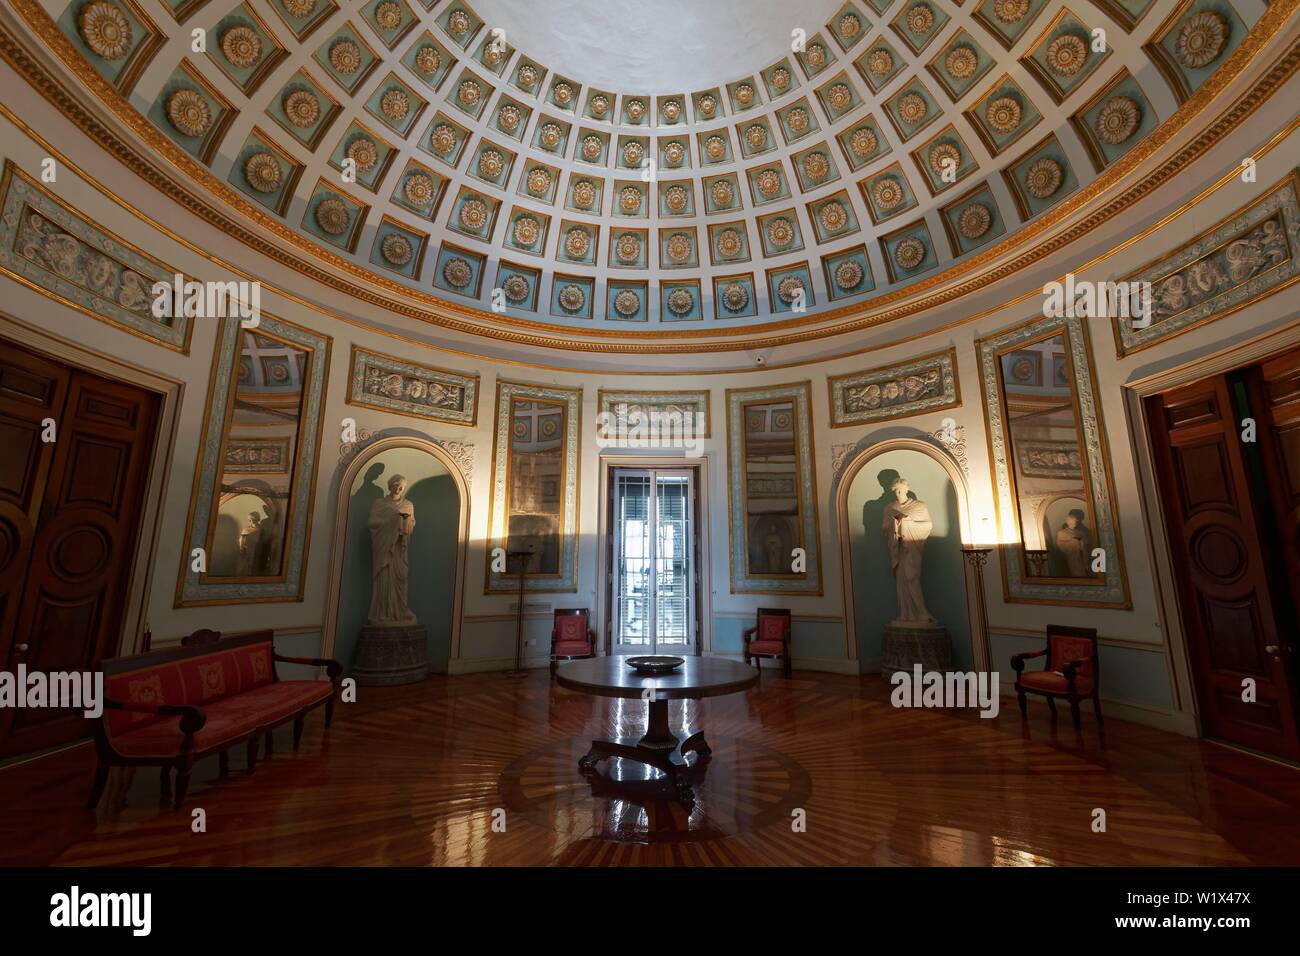 Dome hall or rotunda in the palace St. Michael and St. George, also old palace, Corfu city, island Corfu, Ionian islands, Greece Stock Photo